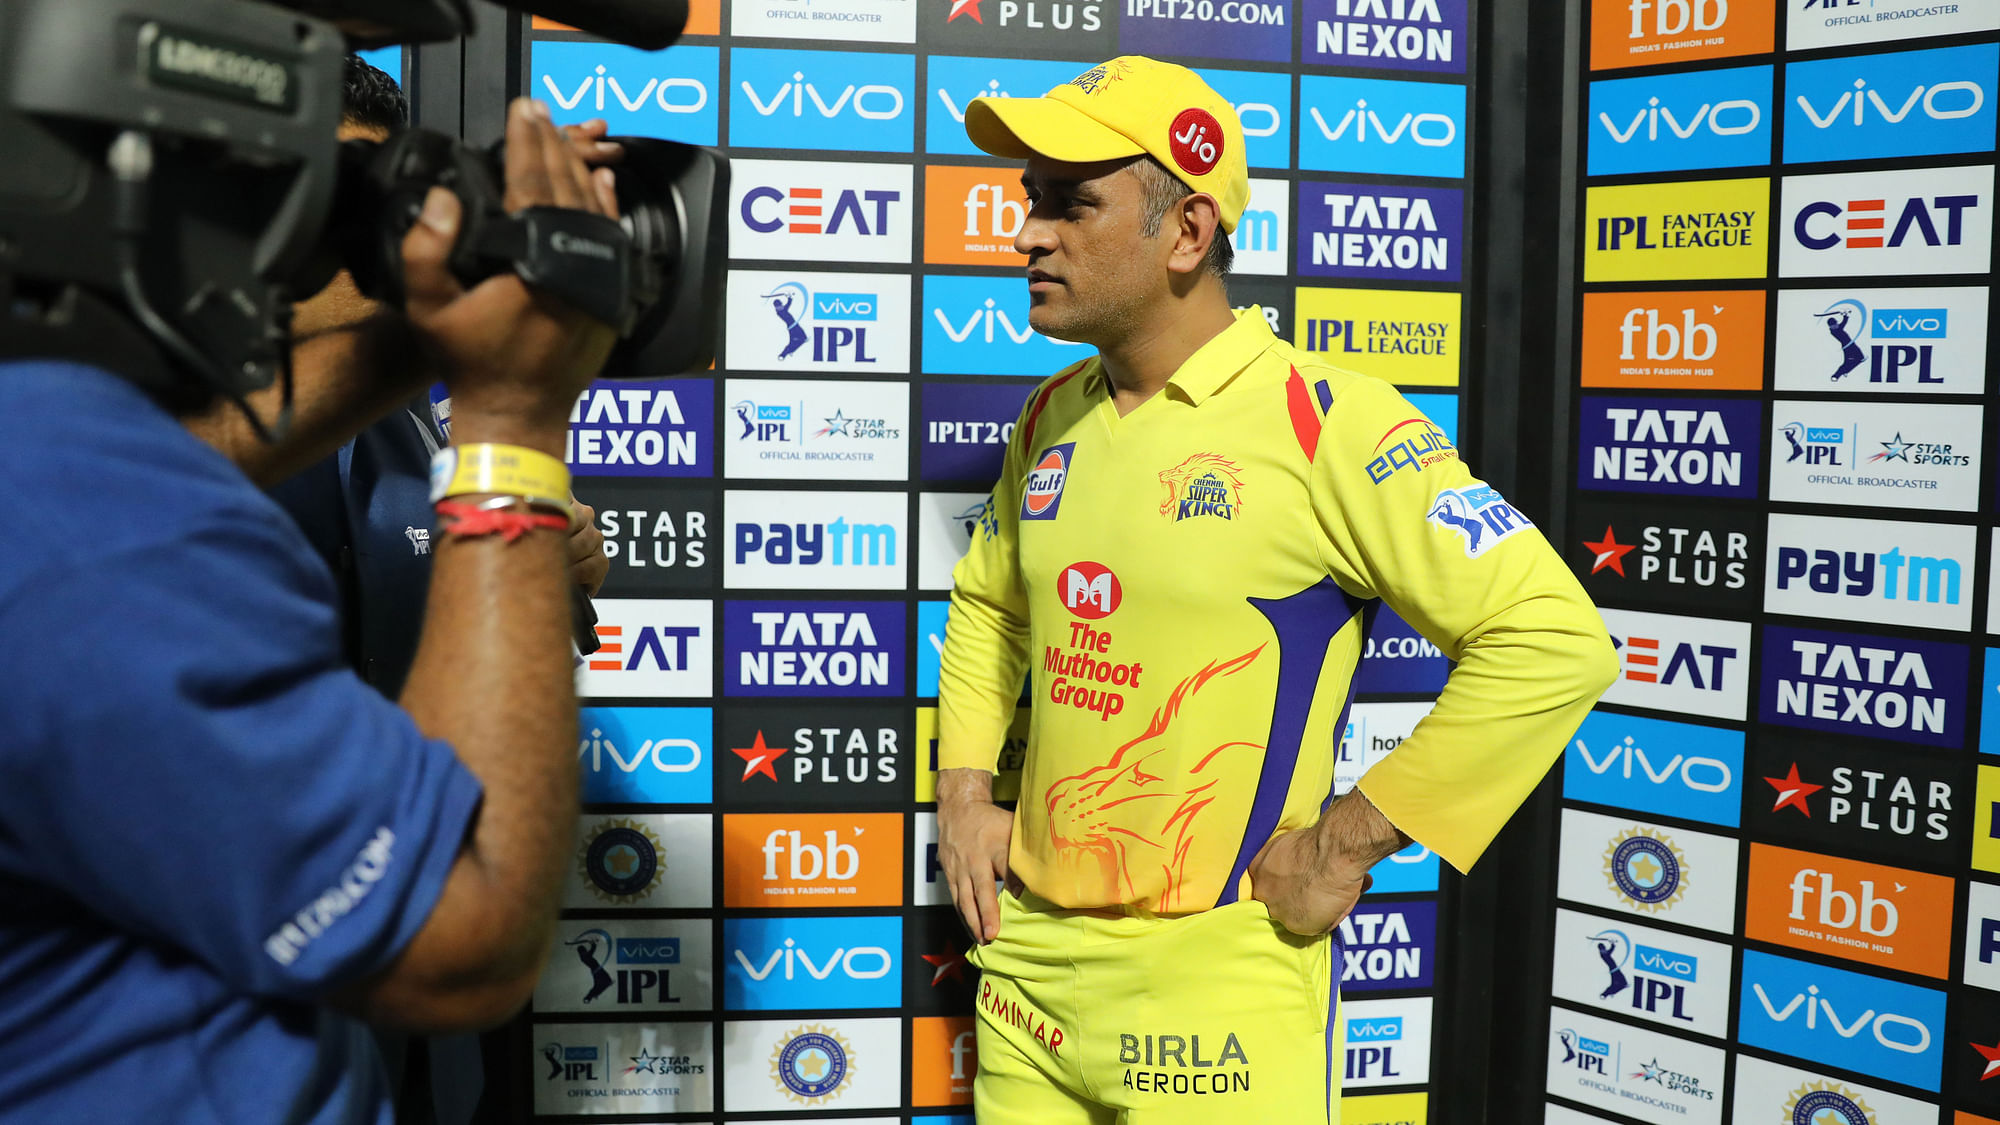 MS Dhoni speaks about Chennai Super Kings’ loss to Delhi Daredevils during a TV interview.